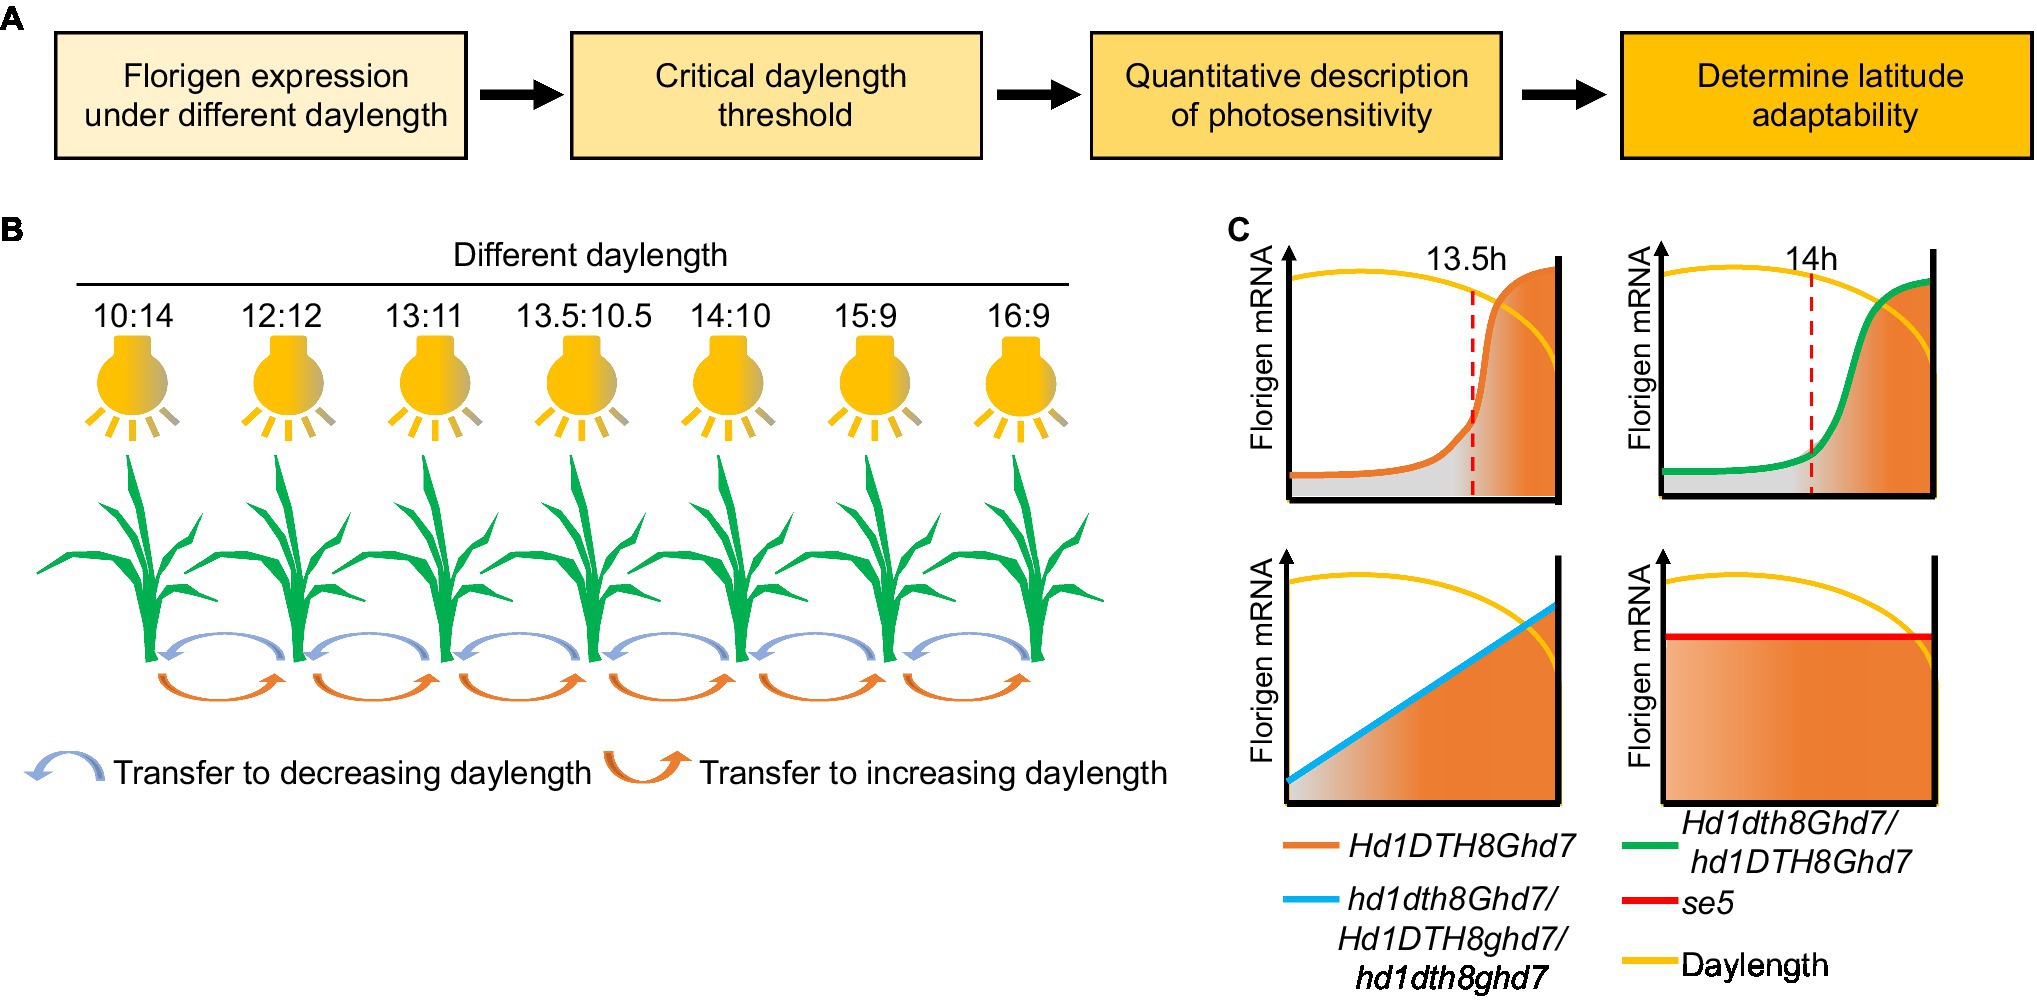 Frontiers | A Daylength Recognition Model of Photoperiodic Flowering